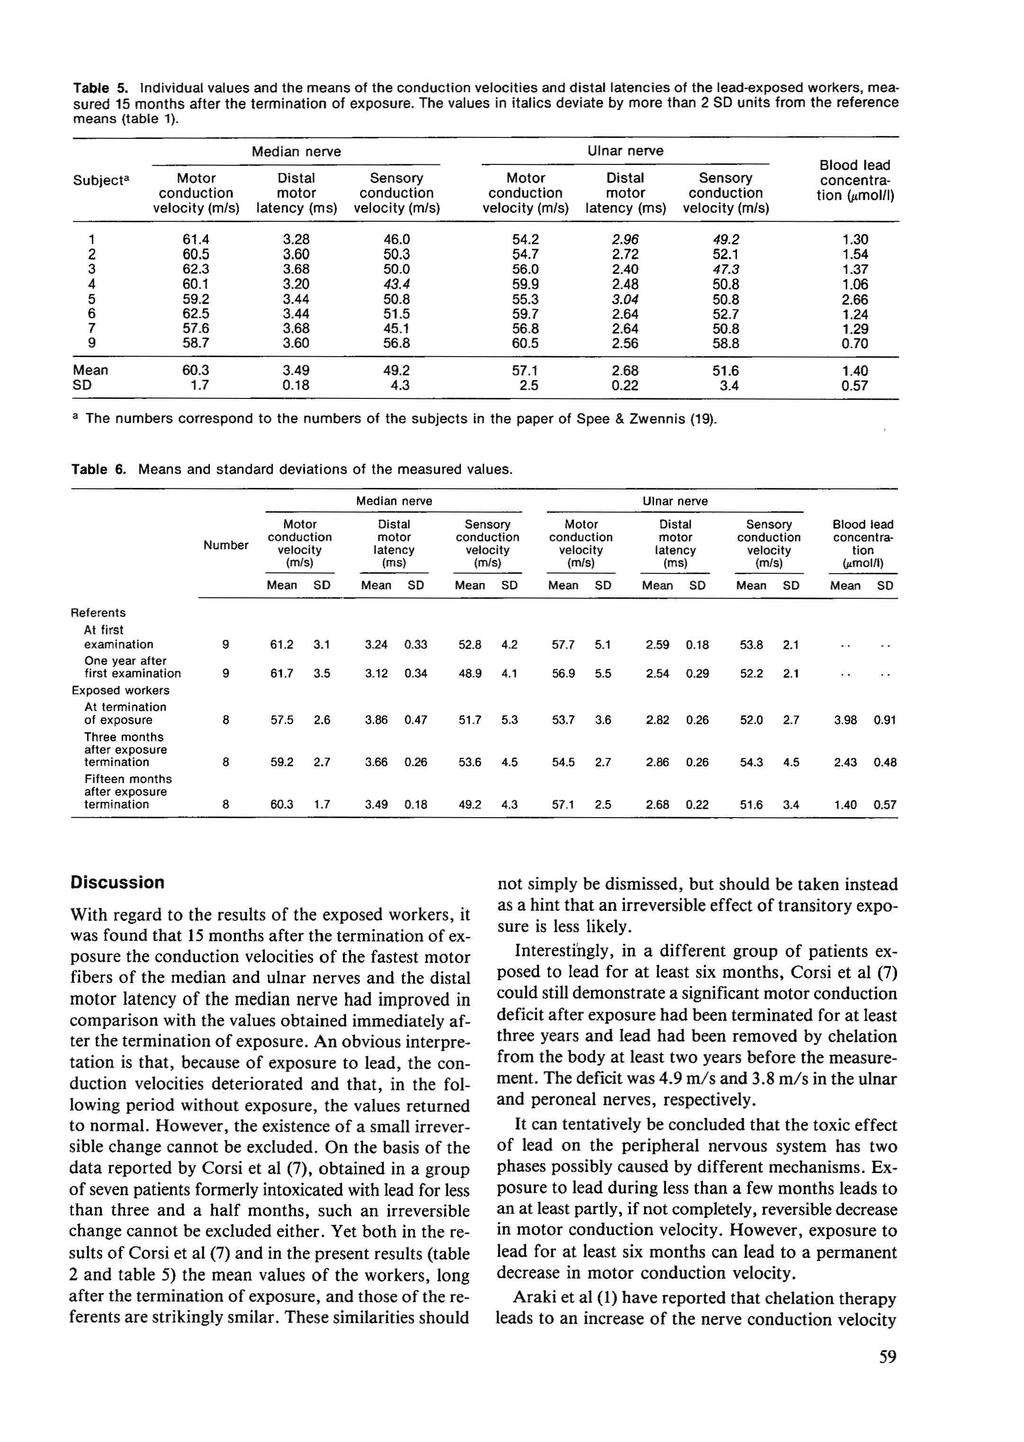 Table 5. Ind ividual values and the means of the conduction veloc ities and distal latencies of the lead-exposed workers, measured 15 months after the termination of exposure.